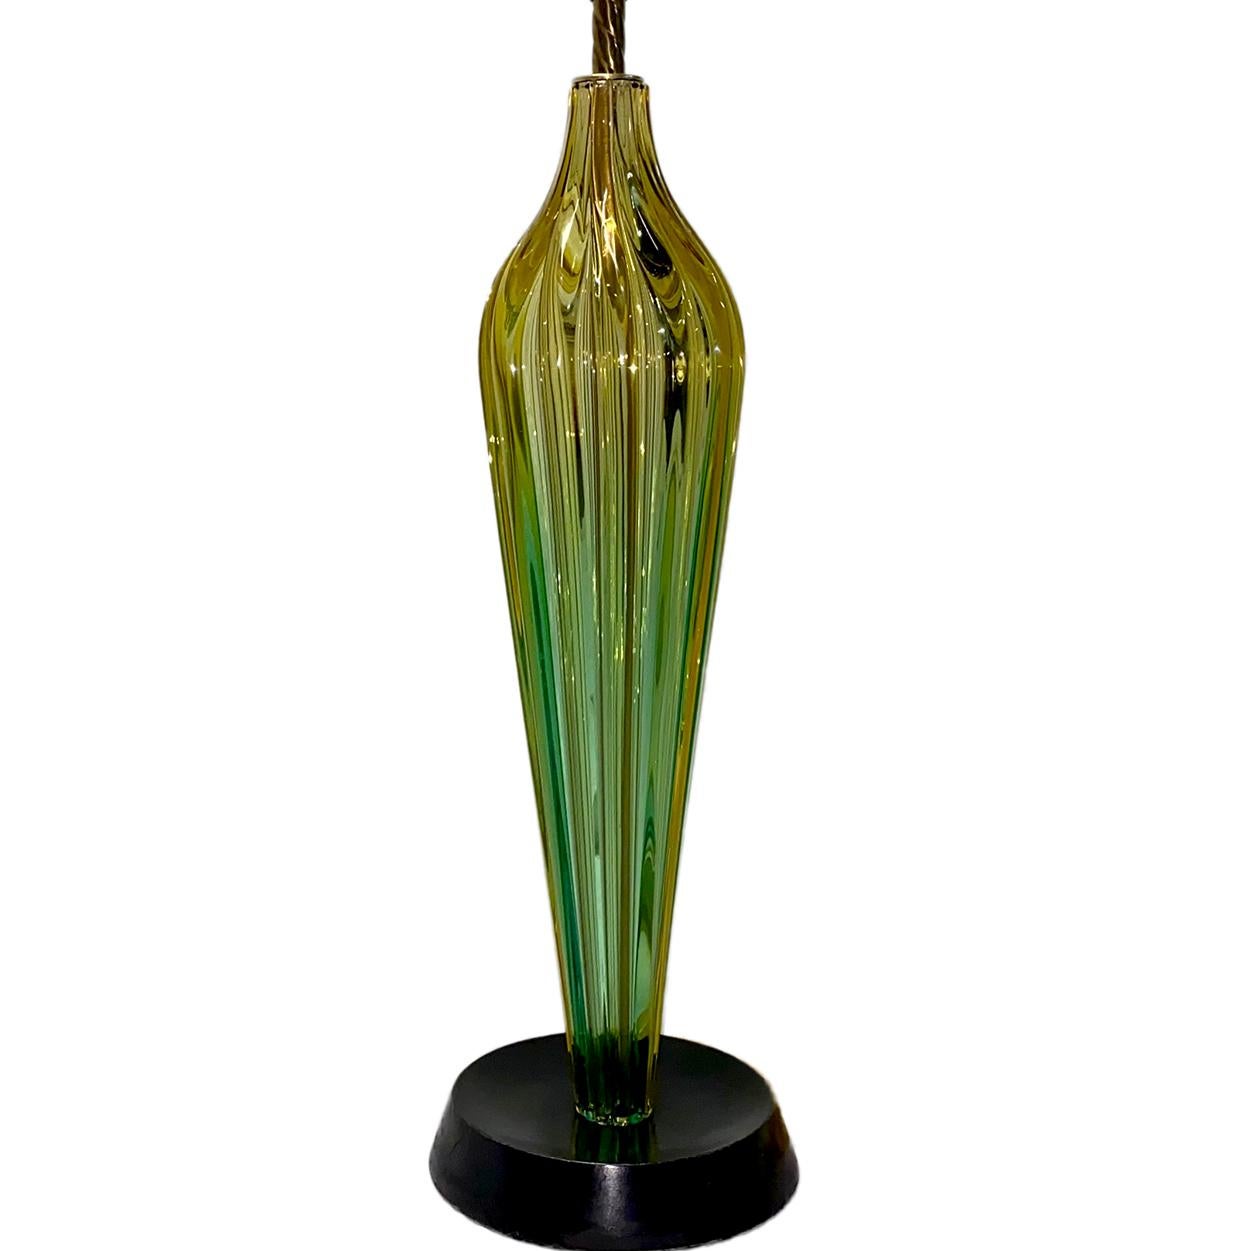 A circa 1920 Murano glass table lamp with wooden base.

Measurements:
Height of body: 23